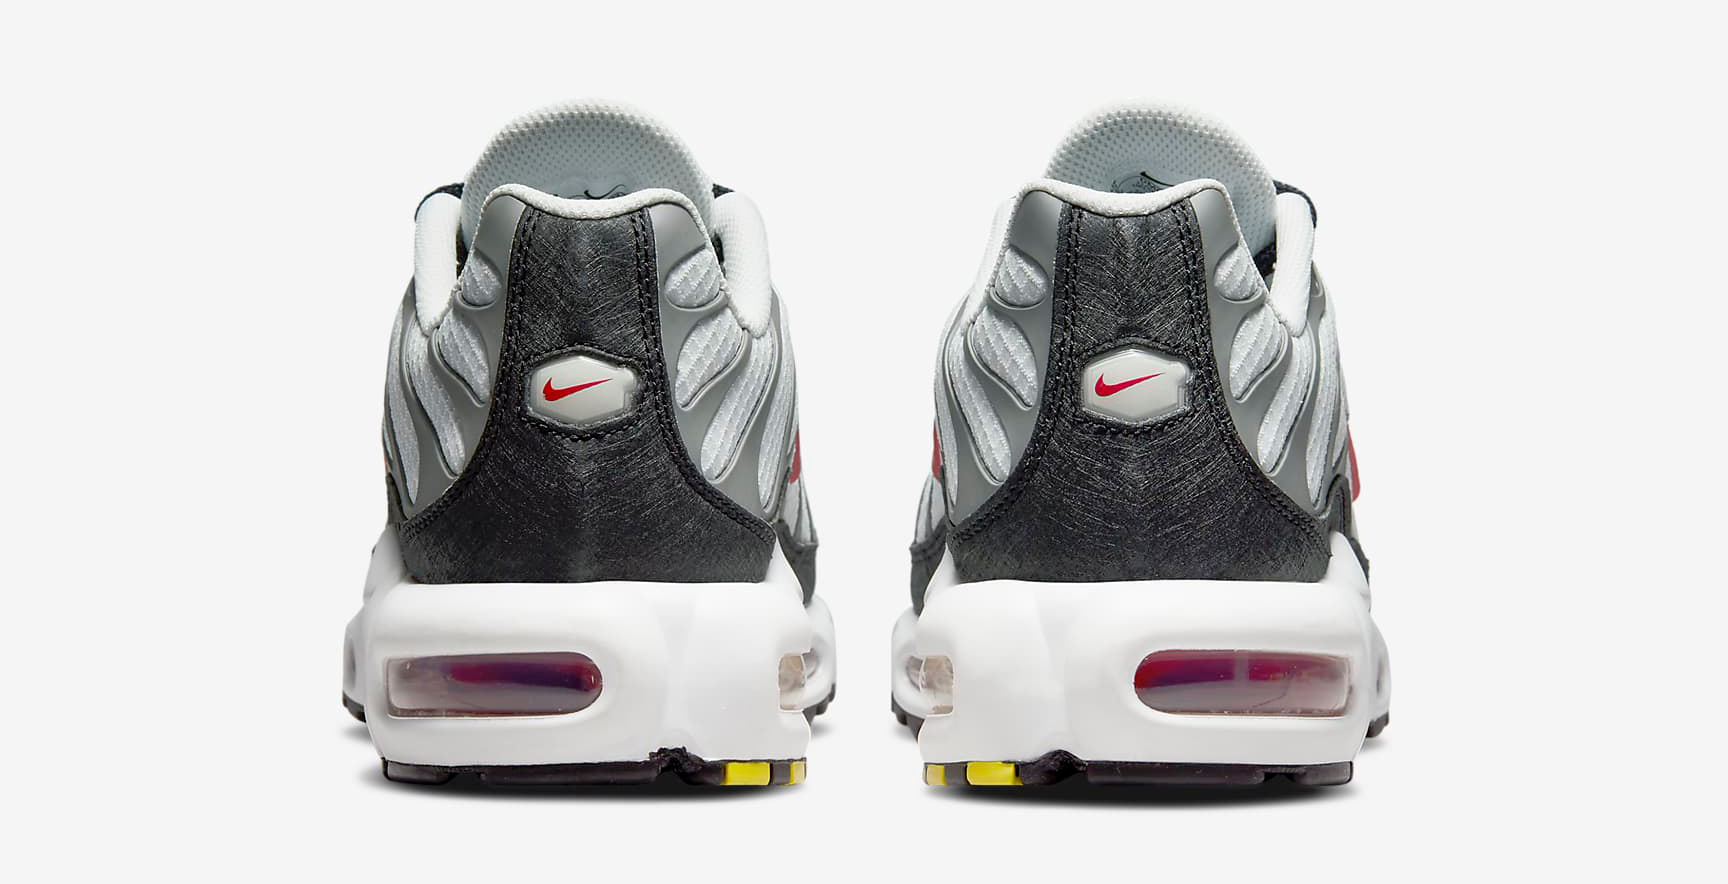 nike-air-max-plus-photon-dust-particle-grey-black-varsity-red-4